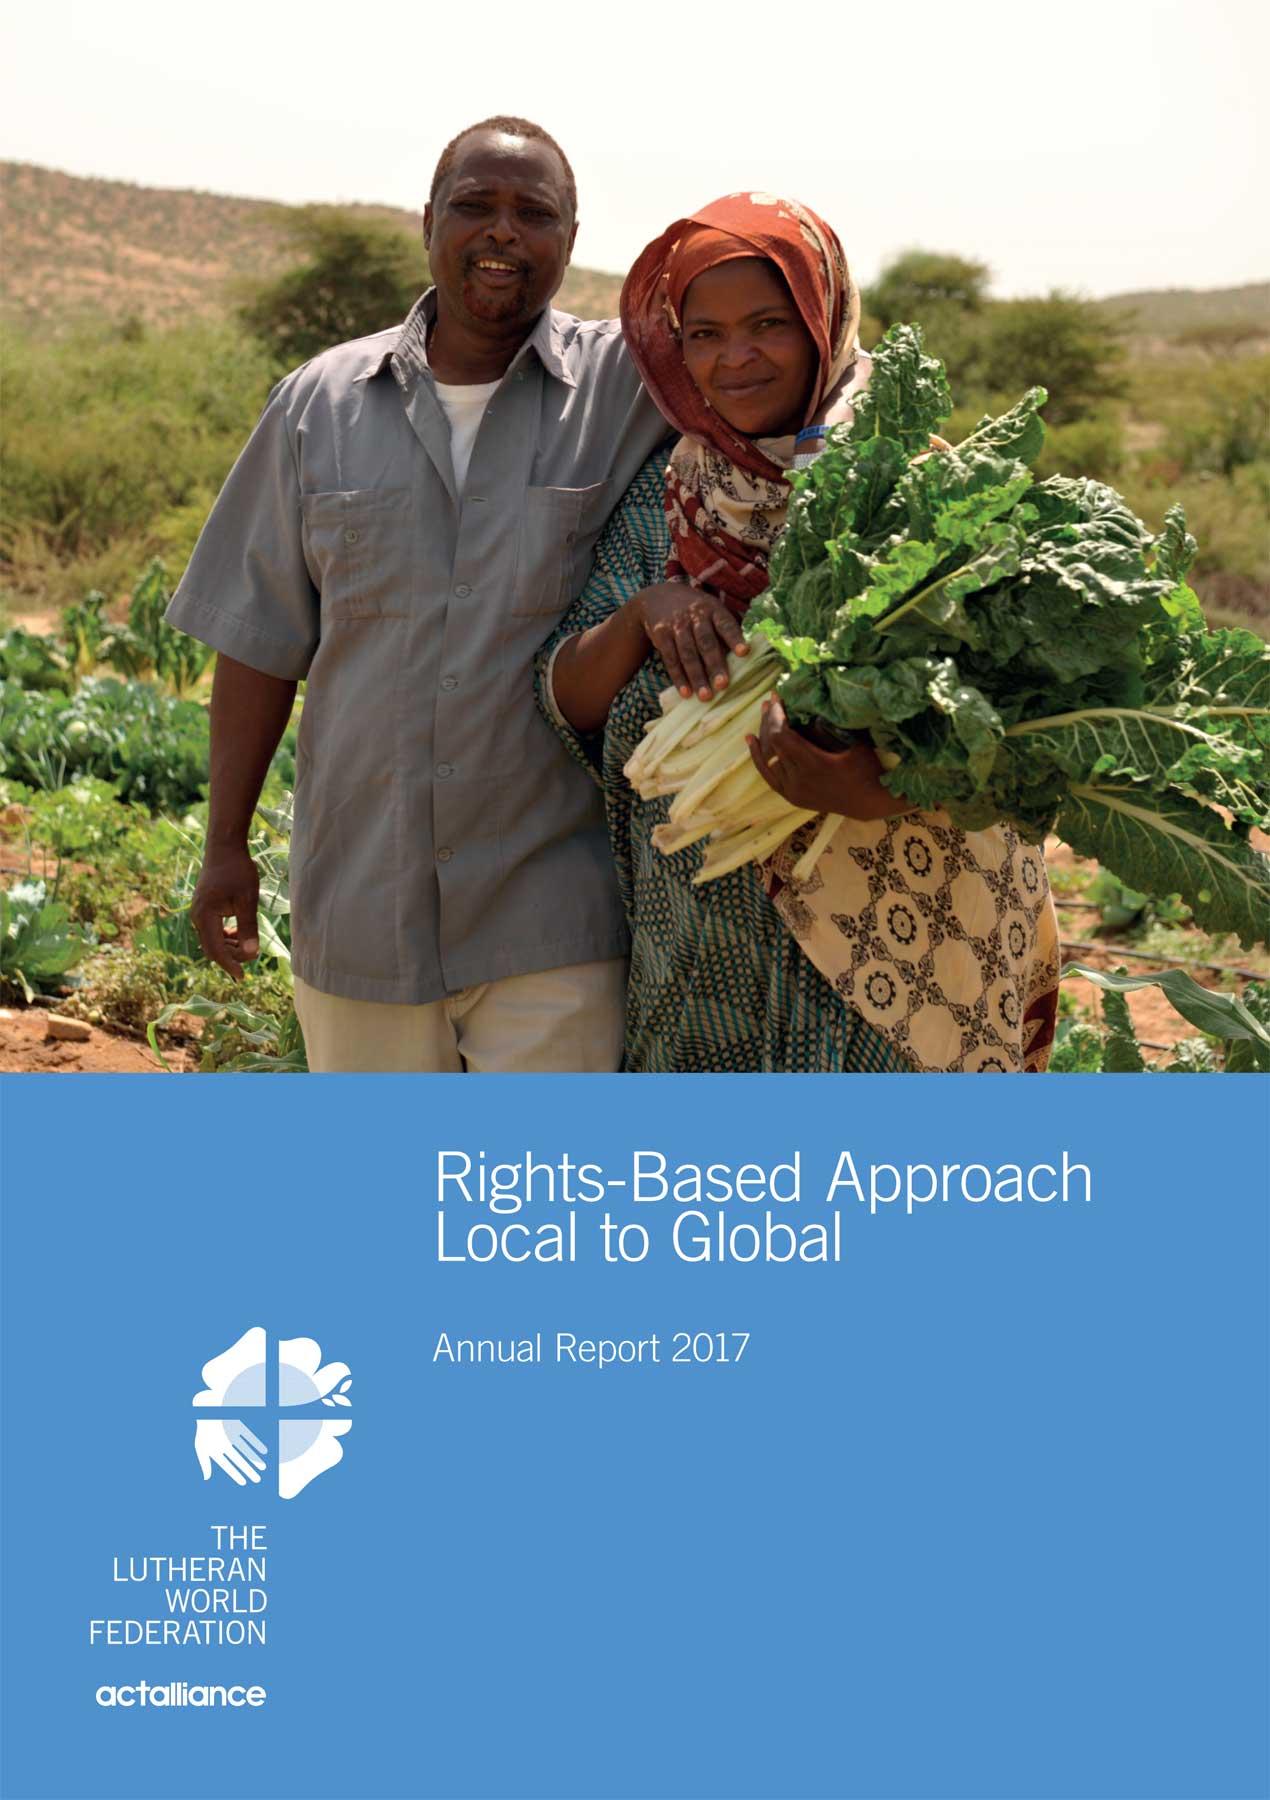 Rights-Based Approach Local to Global